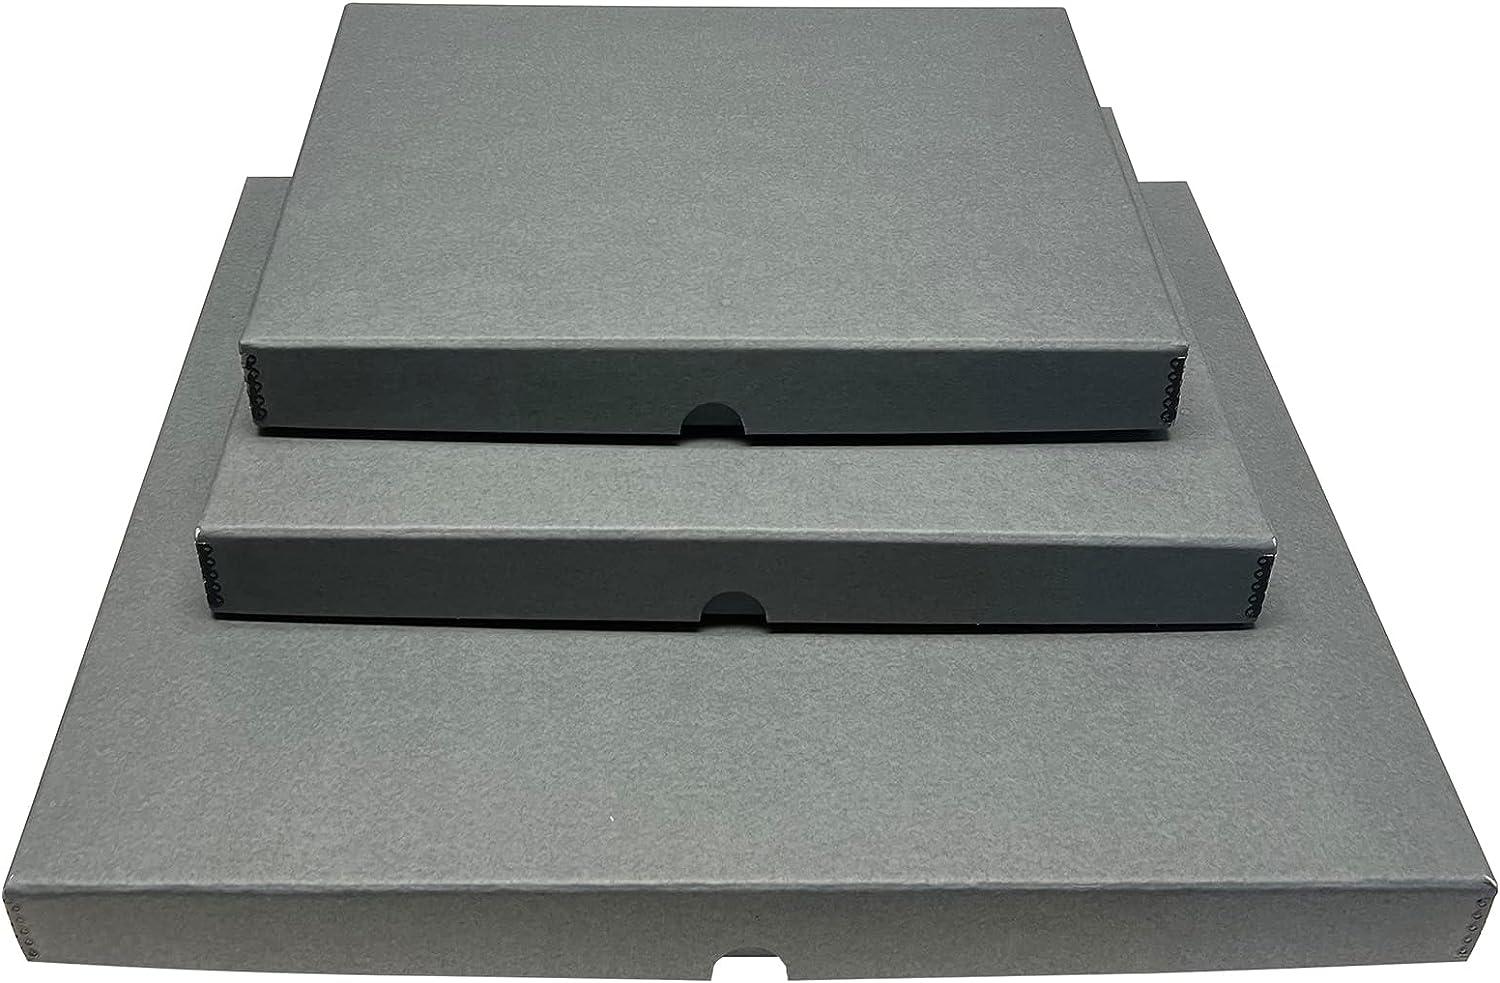 Lineco, 9x12 Gray Color, Museum Archival Storage Box, Drop Front Design.  Acid-Free with Metal Edge. Protects Picture Longevity, Organize Photos